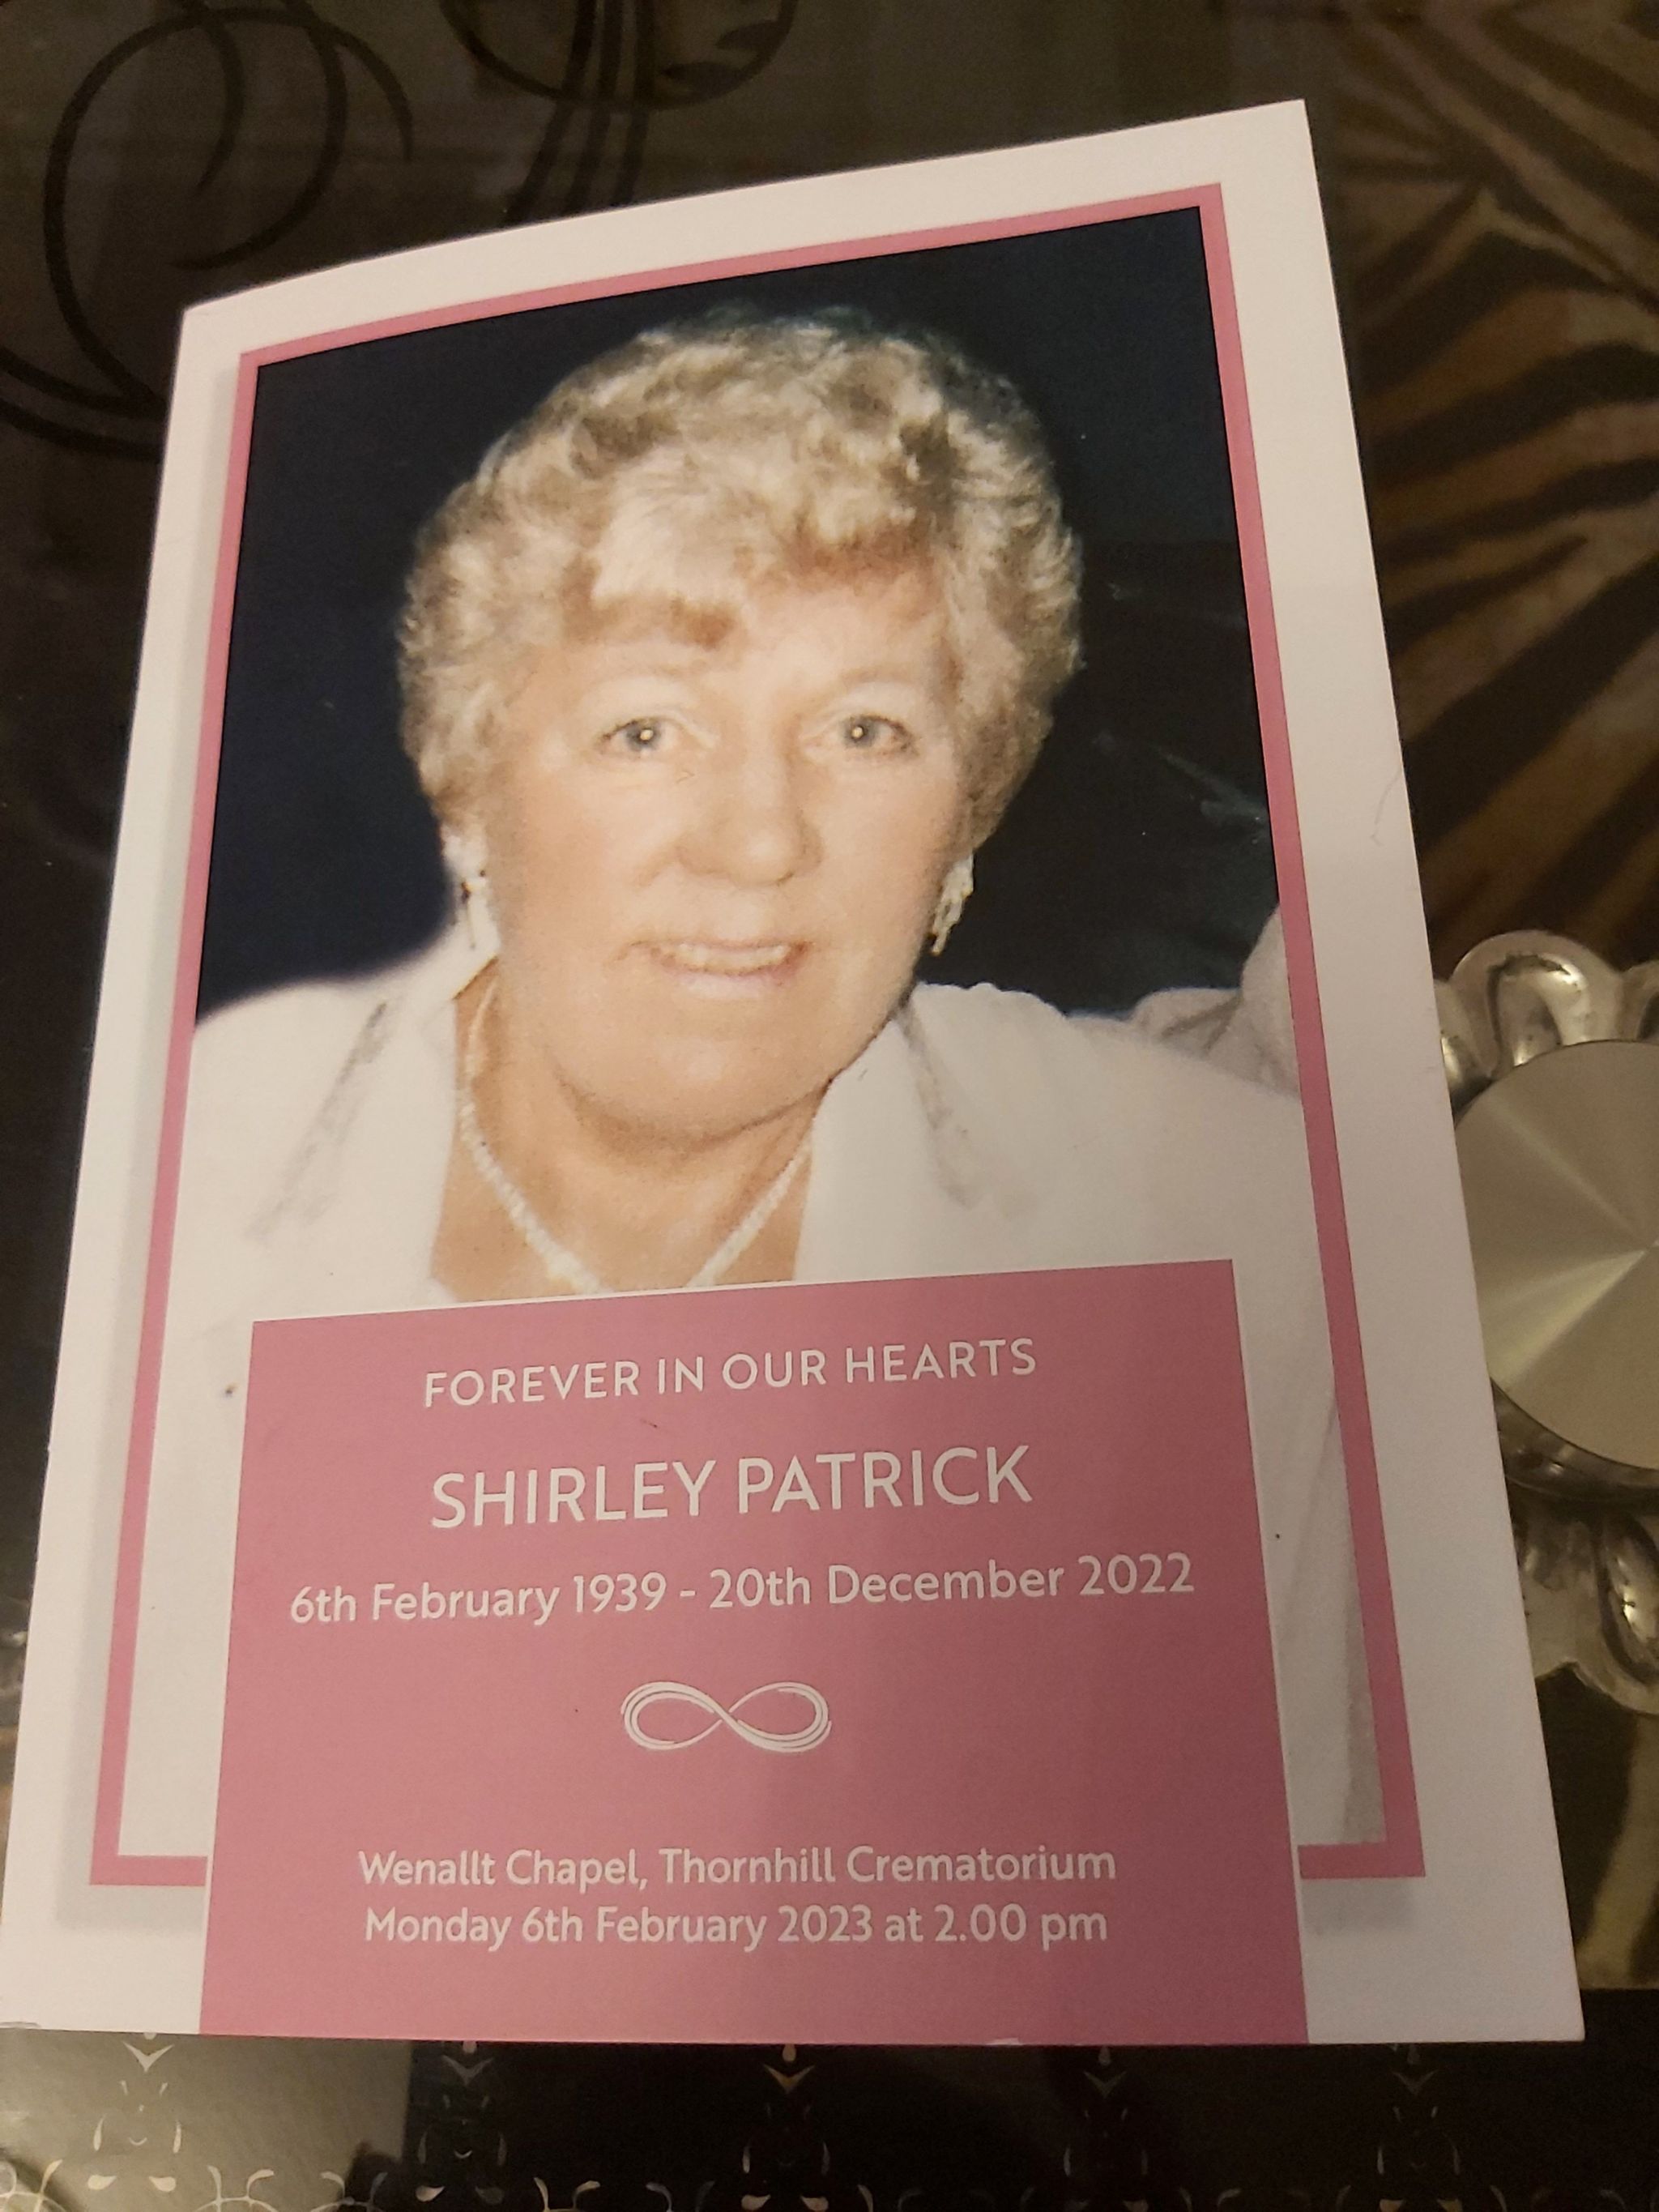 The order of service from Shirley's funeral